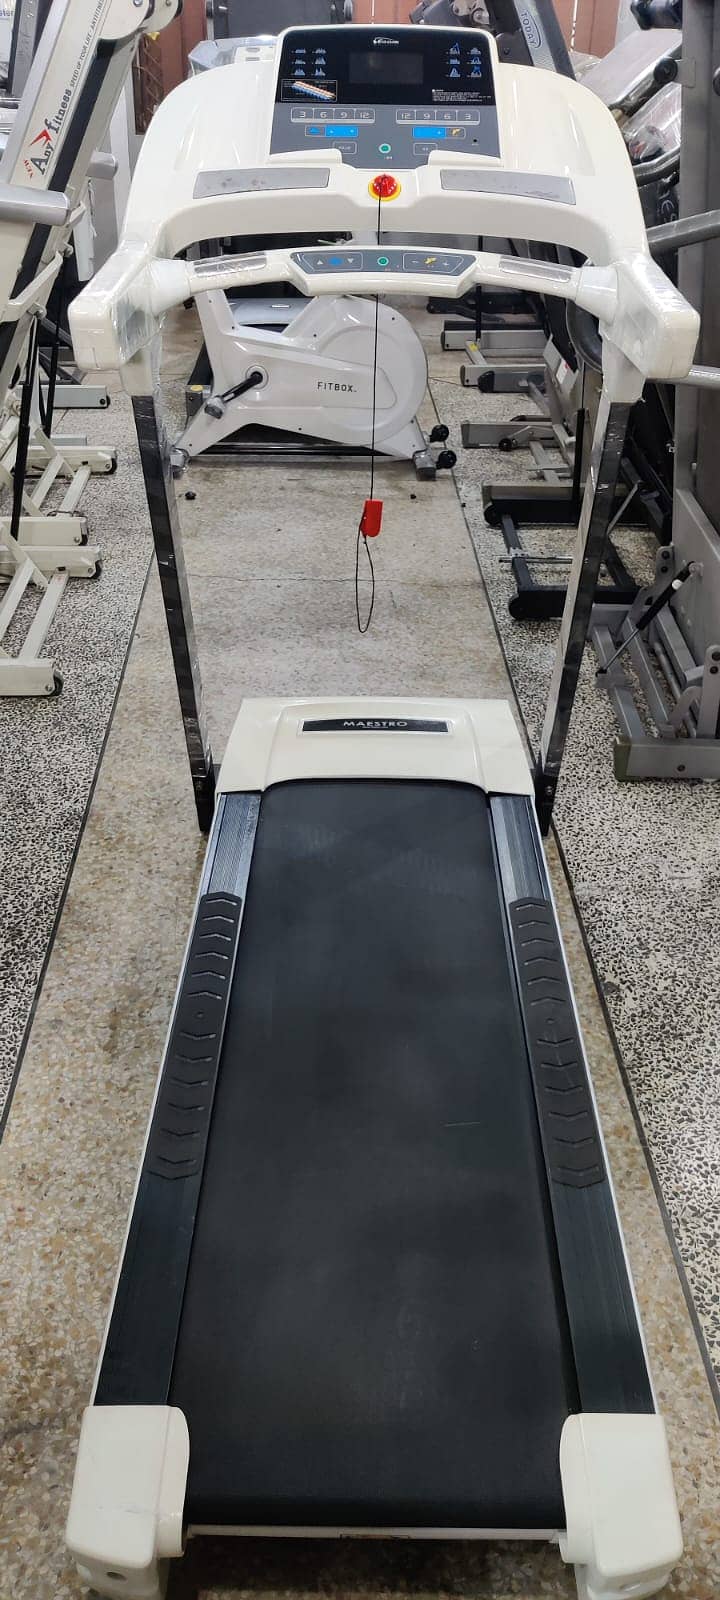 Treadmill Cycle Elliptical Running Machine Cardio Home & Commercial KW 7